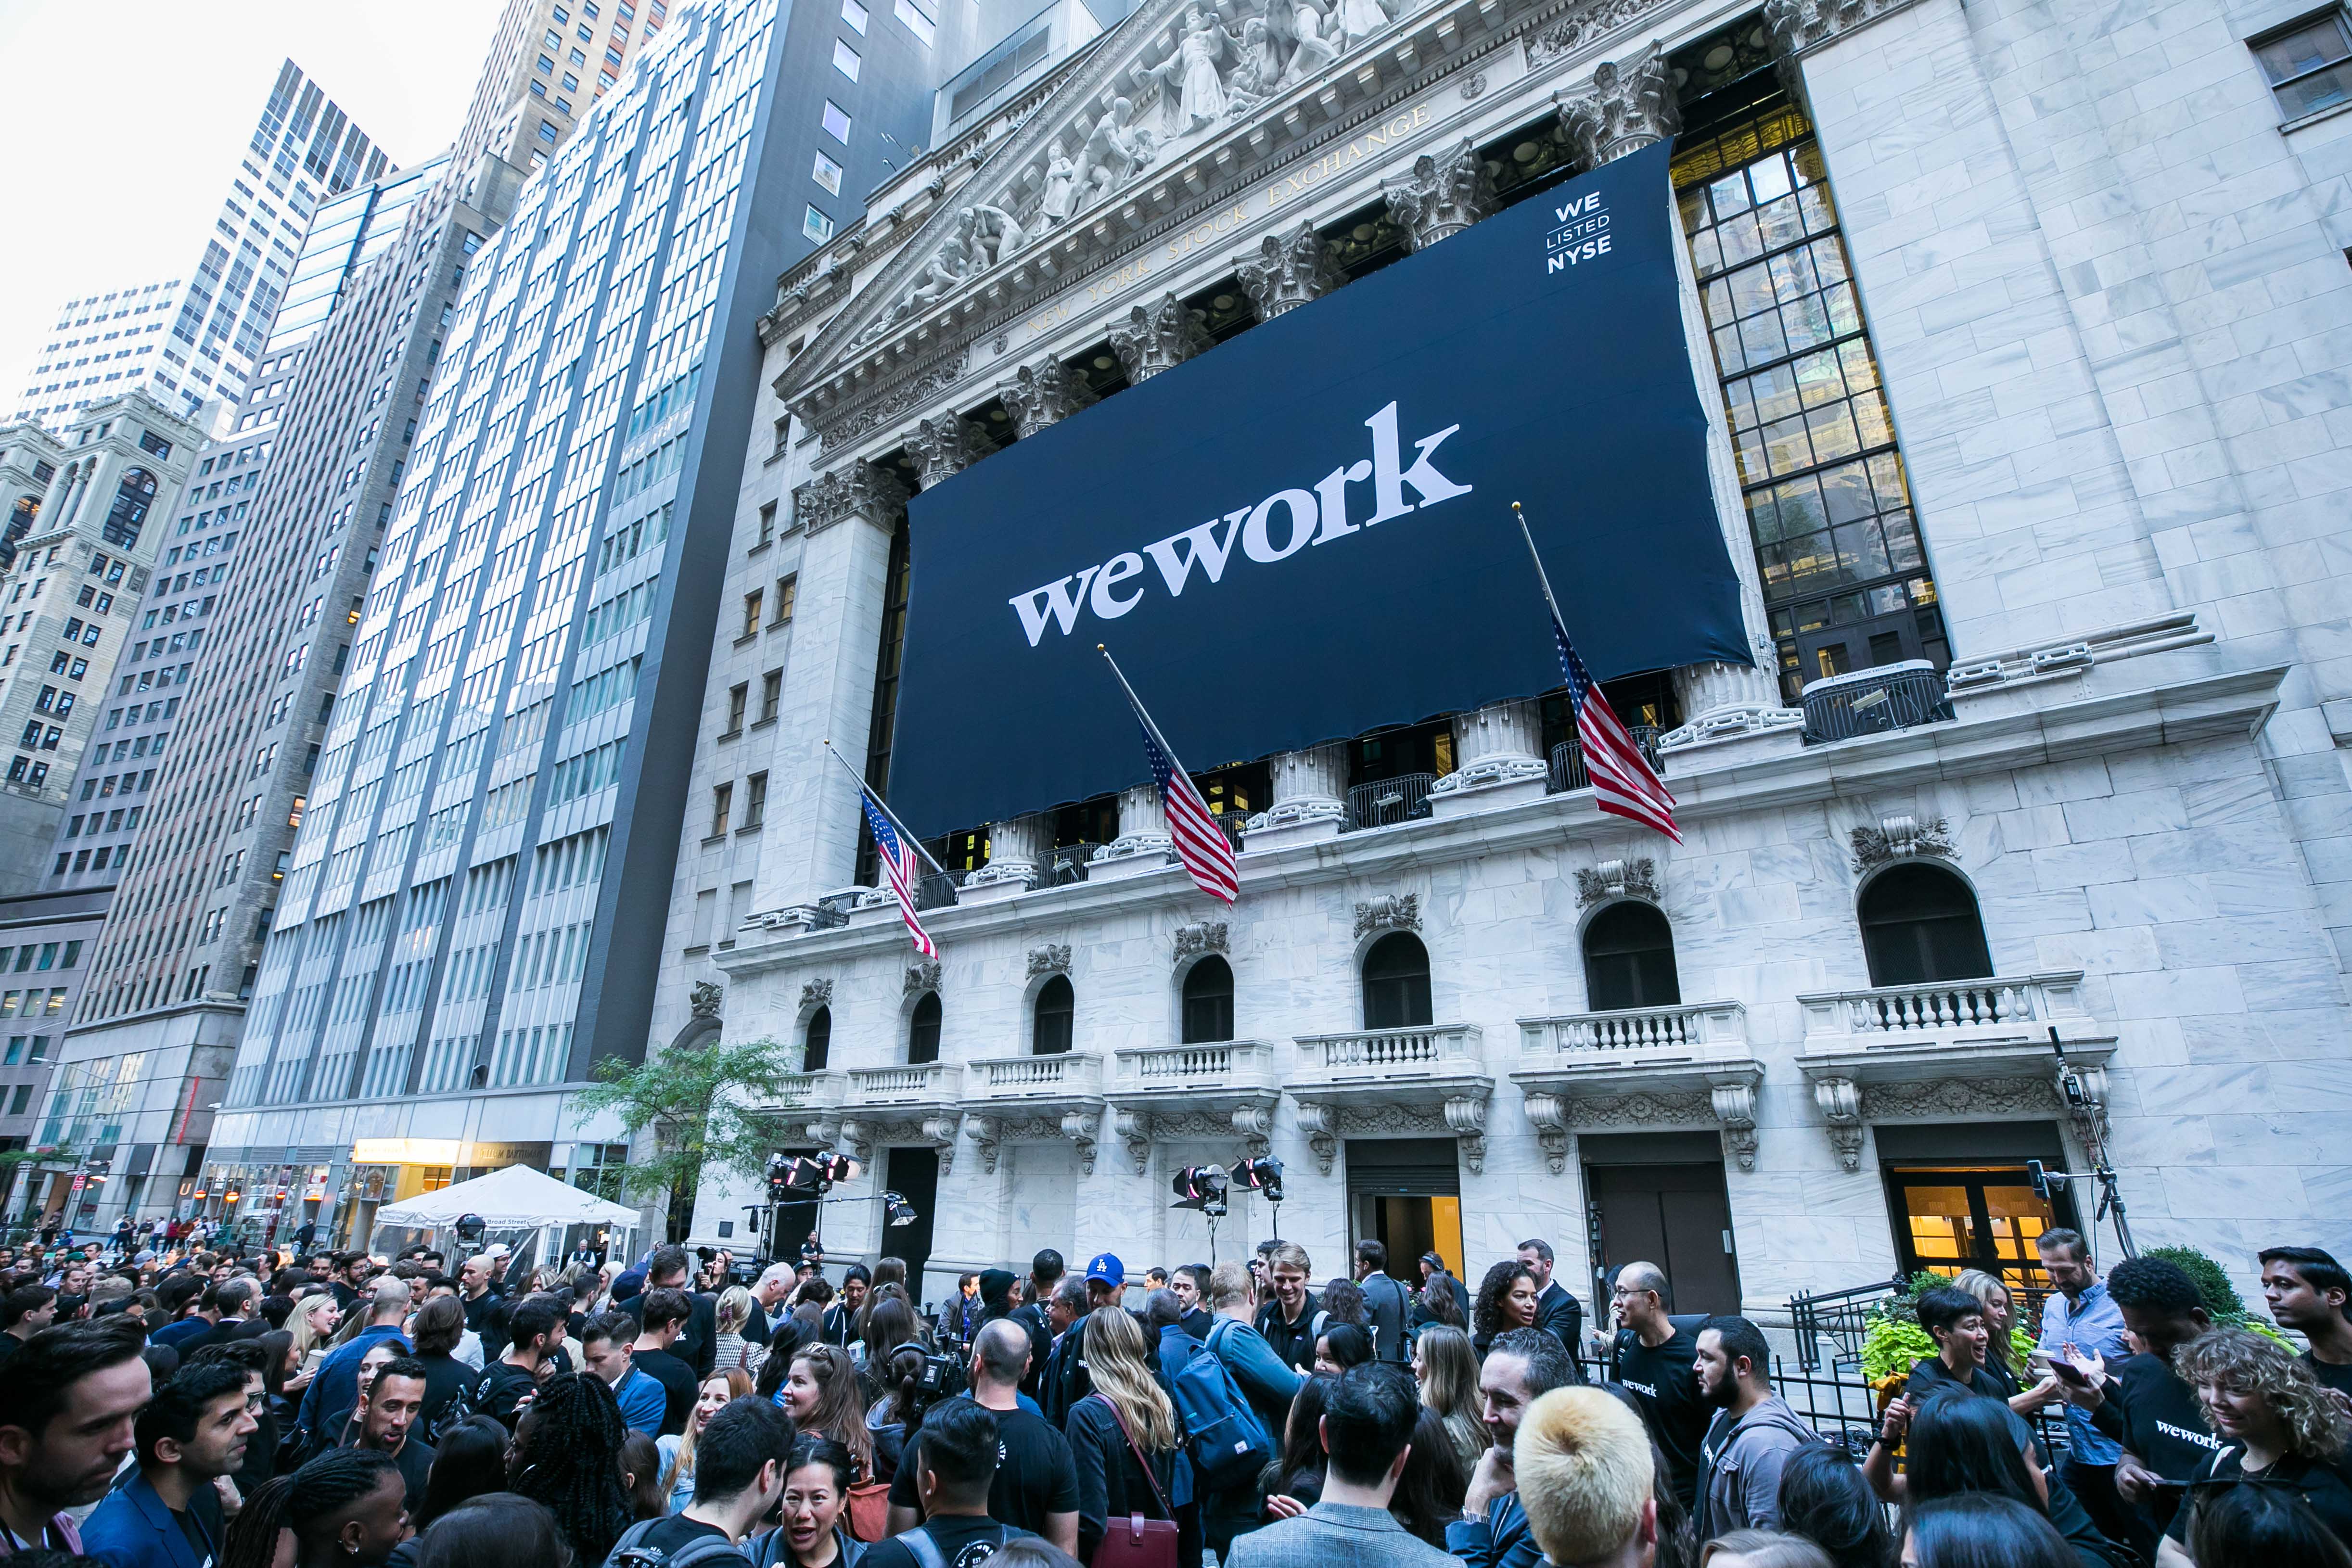 A large crowd celebrates WeWork’s listing